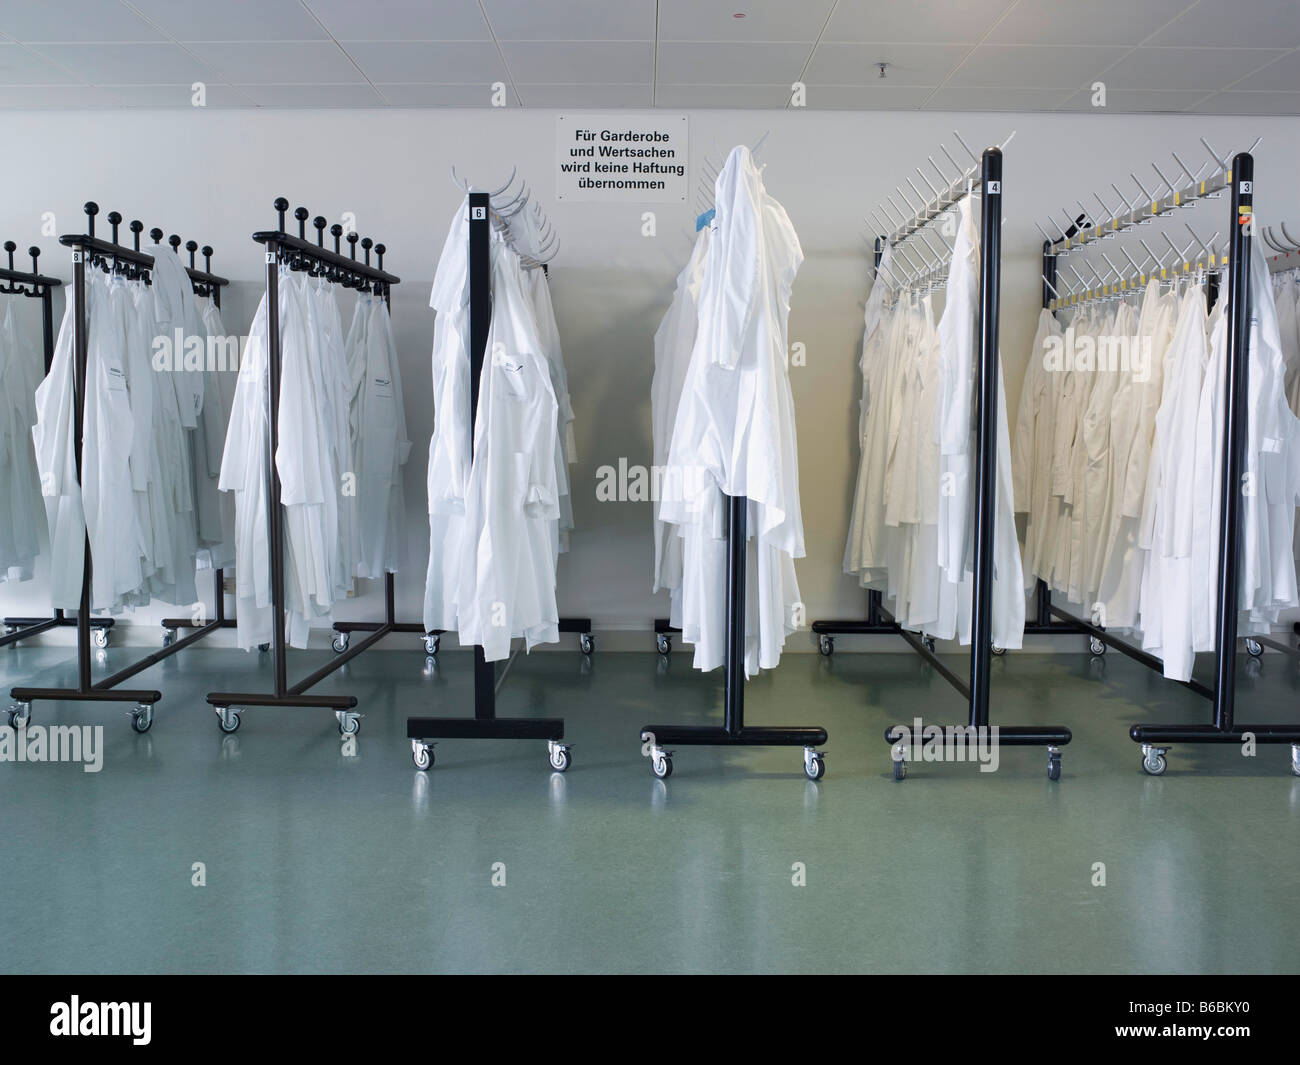 Clothes hanging on hangers Stock Photo